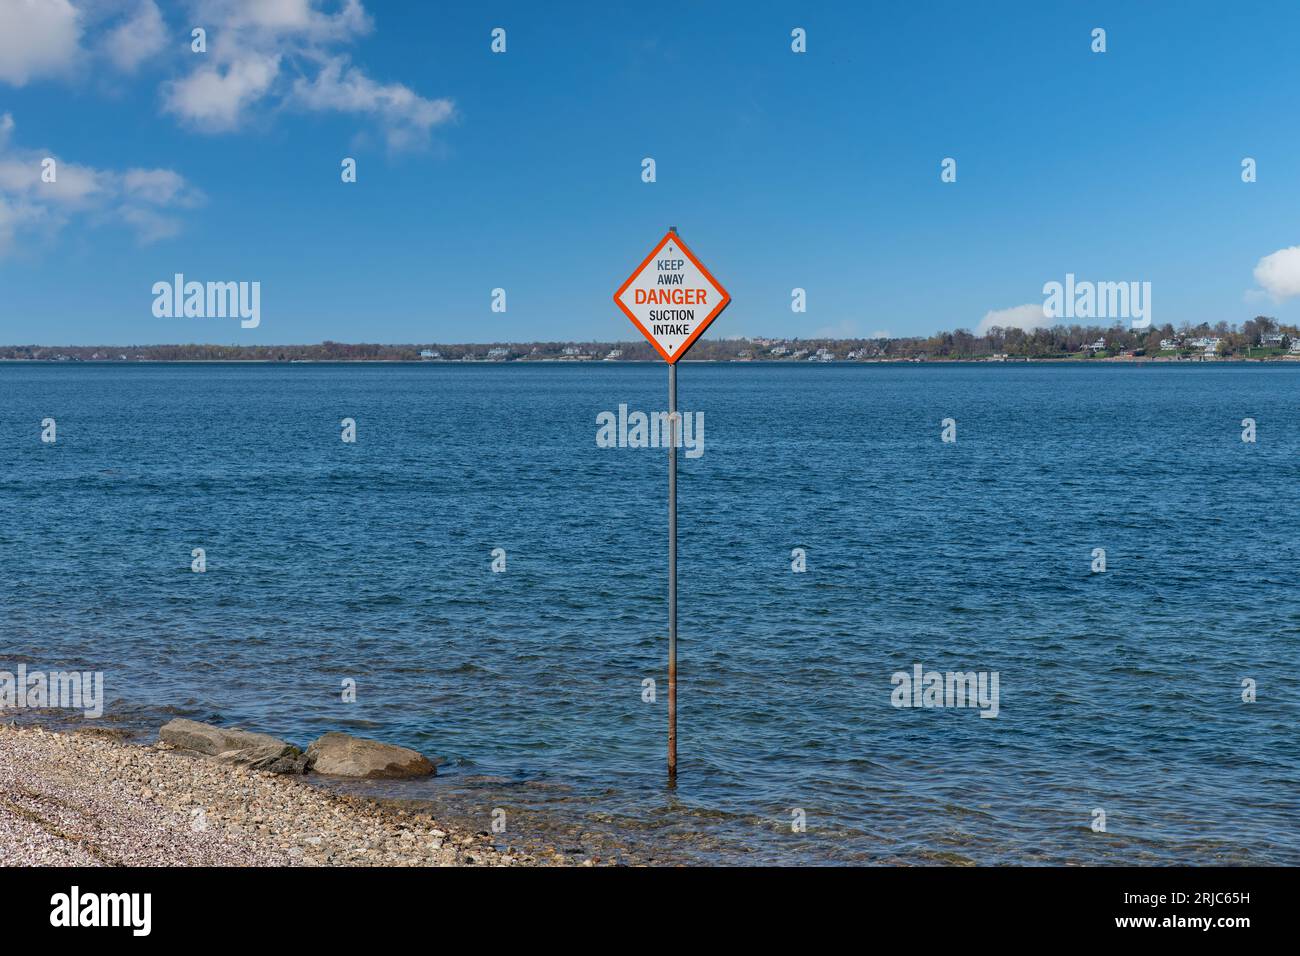 View over a large body of water with in front on shore a warning sign on a post advising of danger and to keep away from the suction intake Stock Photo